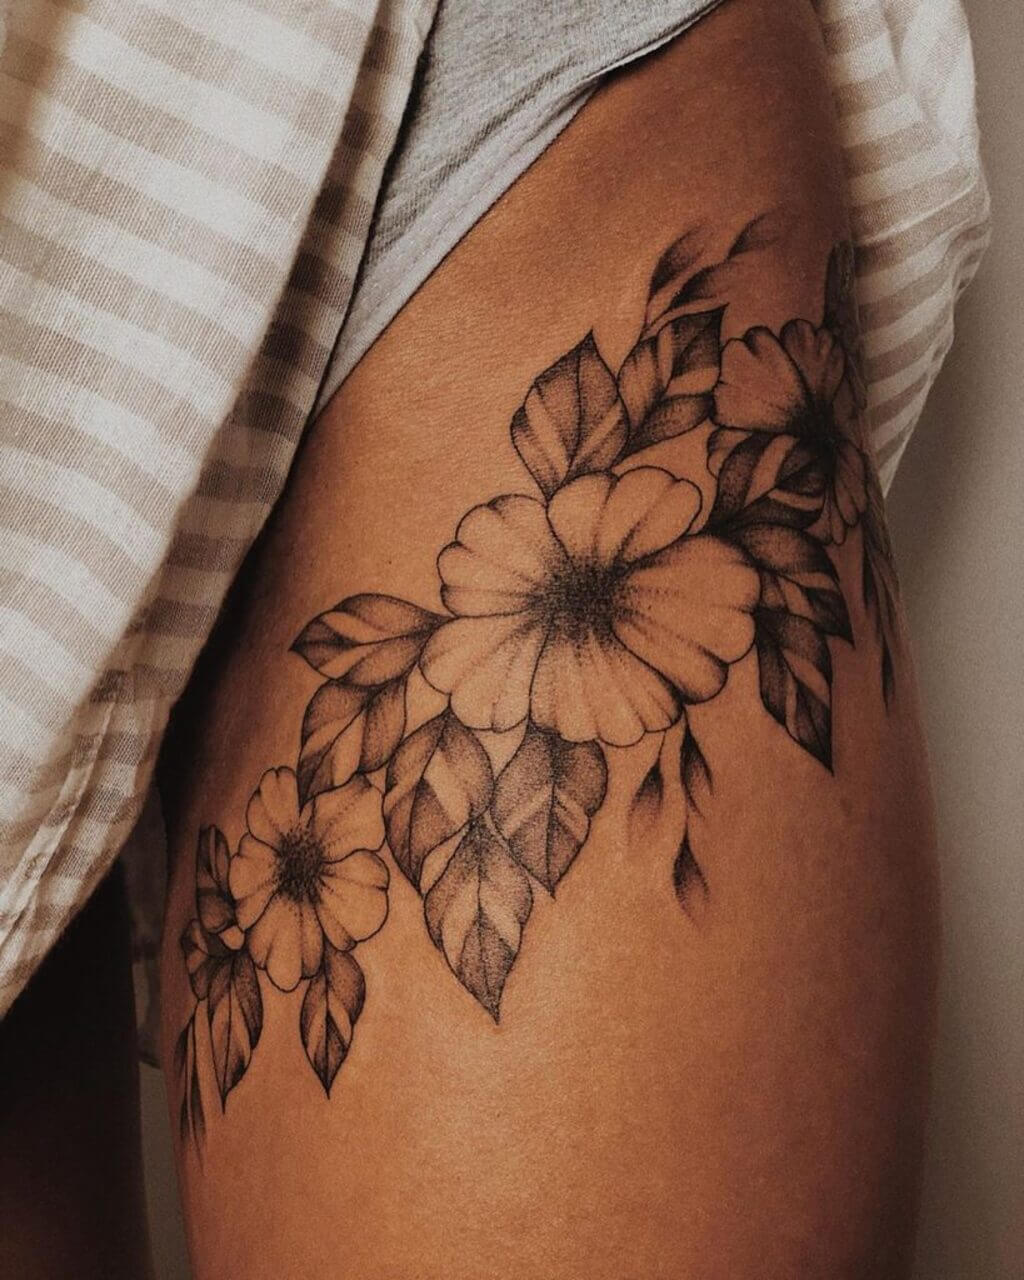 10 Sexy Thigh Tattoos For Women That Are Charmingly Beautiful  Blush